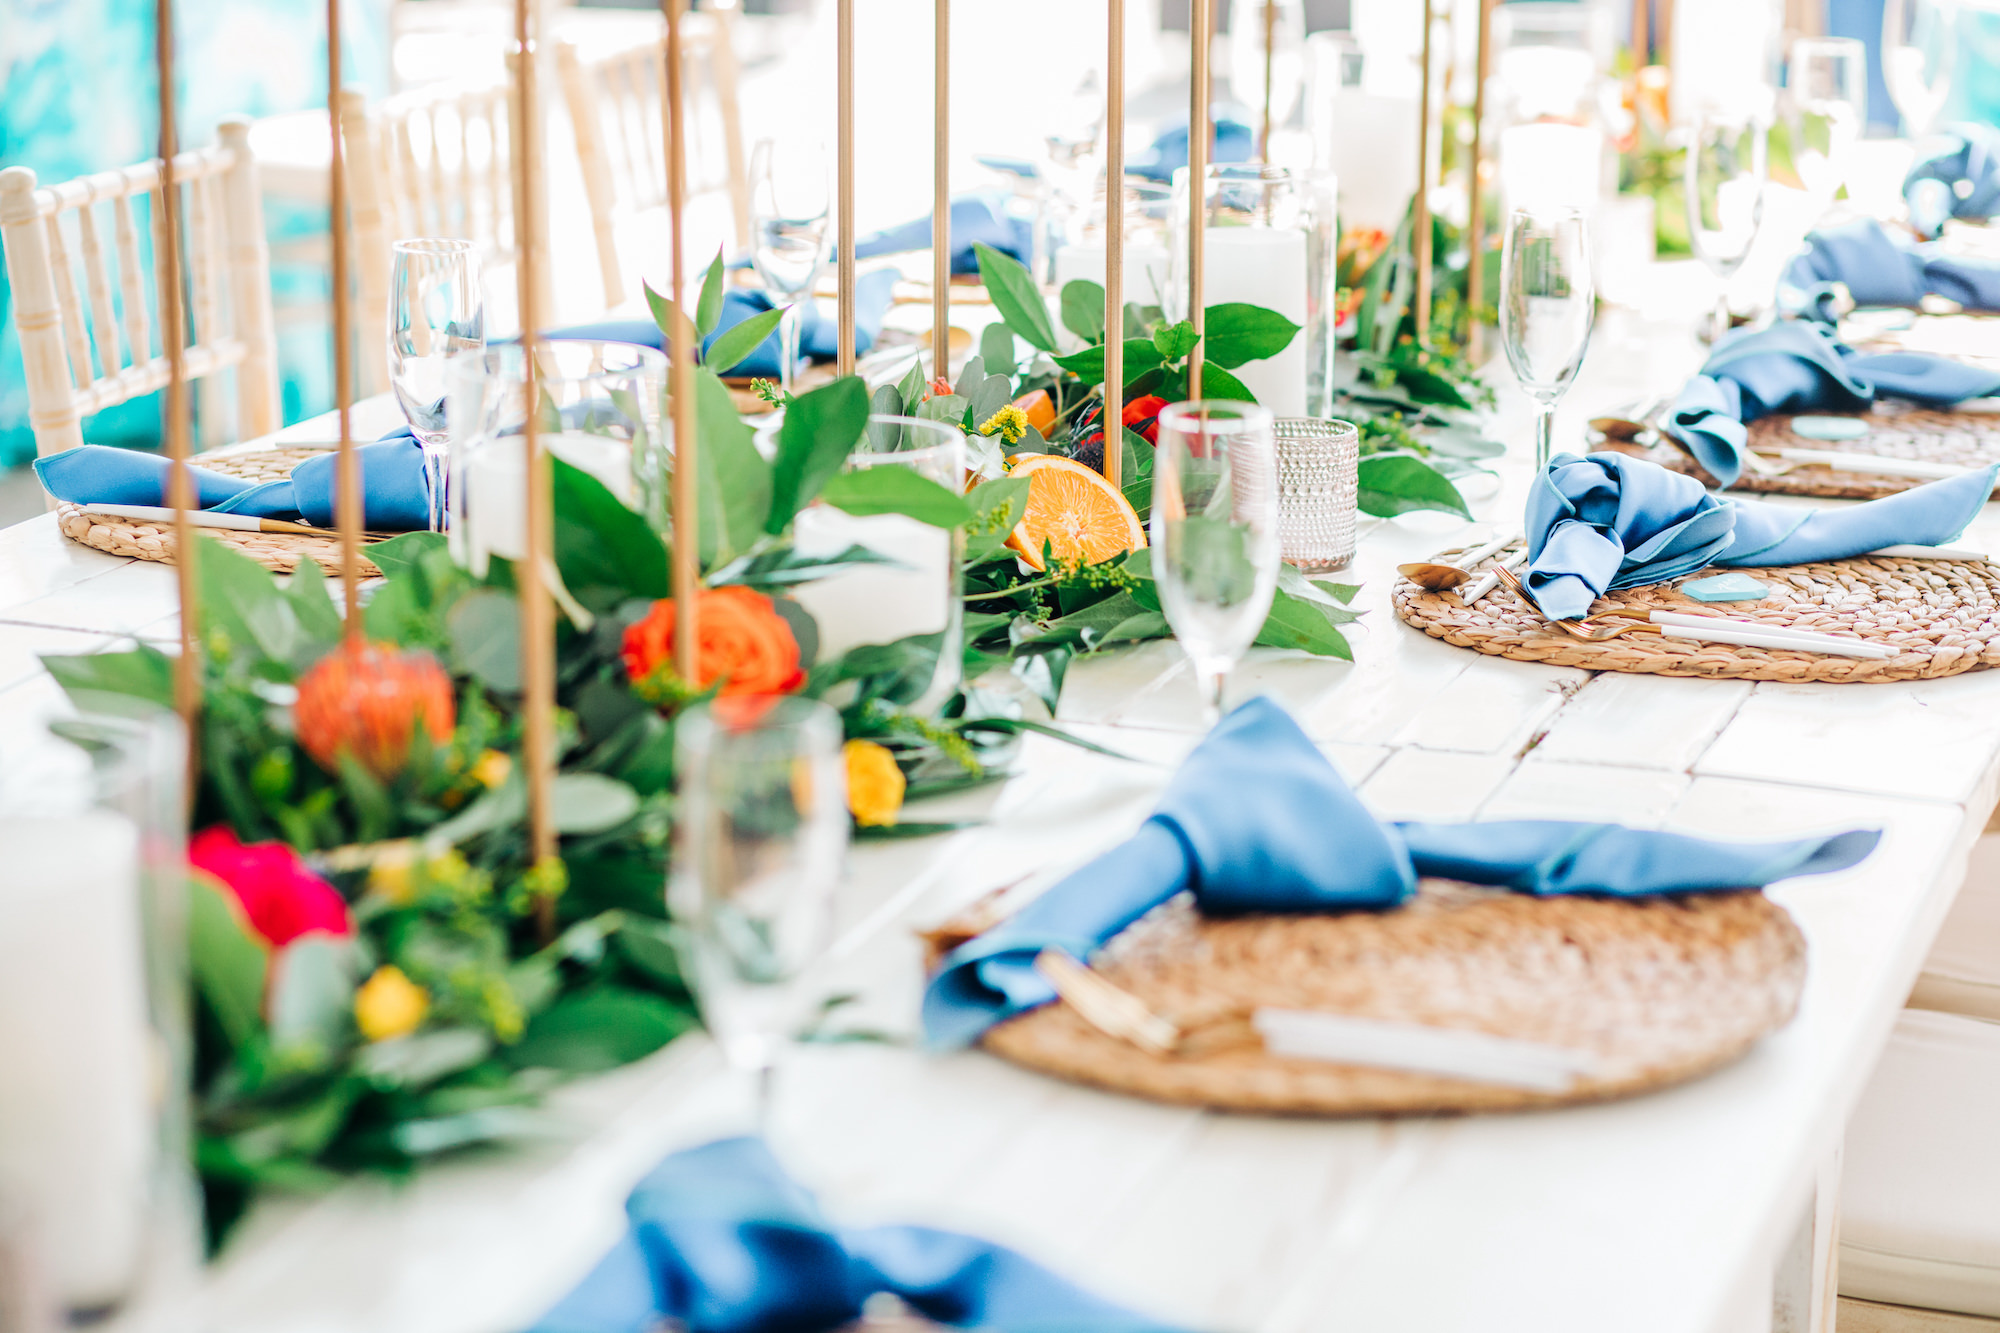 Vibrant Colorful Wedding Reception Decor, Greenery Garland with Red and Yellow Roses, Sliced Oranges,Natural Braided Grass Charger Plate, Dusty Blue Linen Napkin, White and Gold Silverware | Tampa Bay Wedding Rentals Kate Ryan Event Rentals